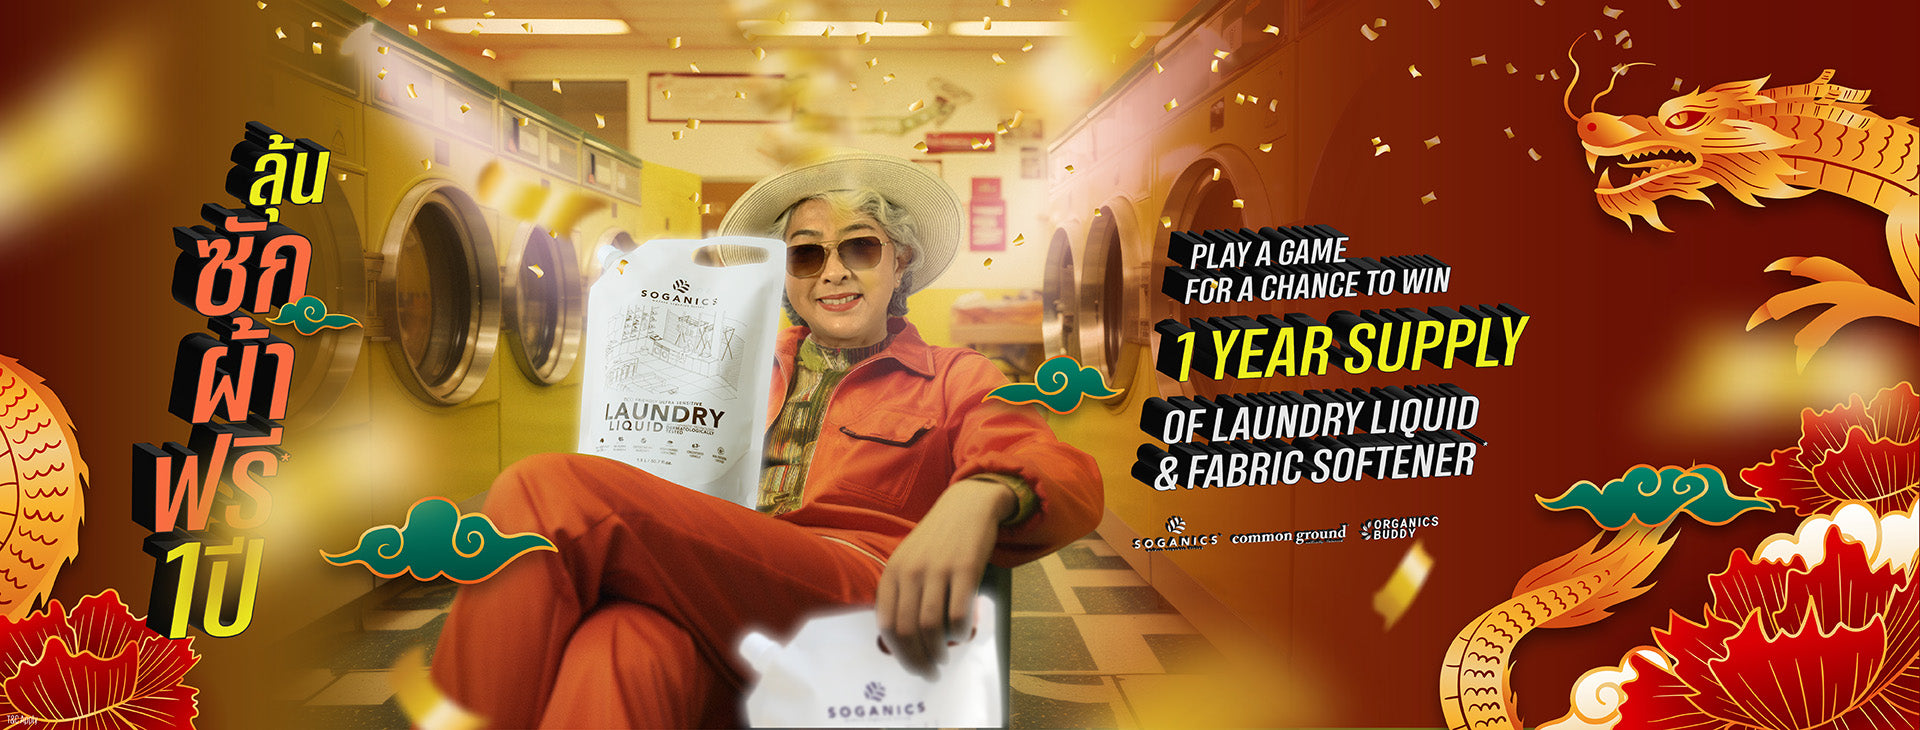 A chance to win 1 YEAR SUPPLY of Laundry Liquid